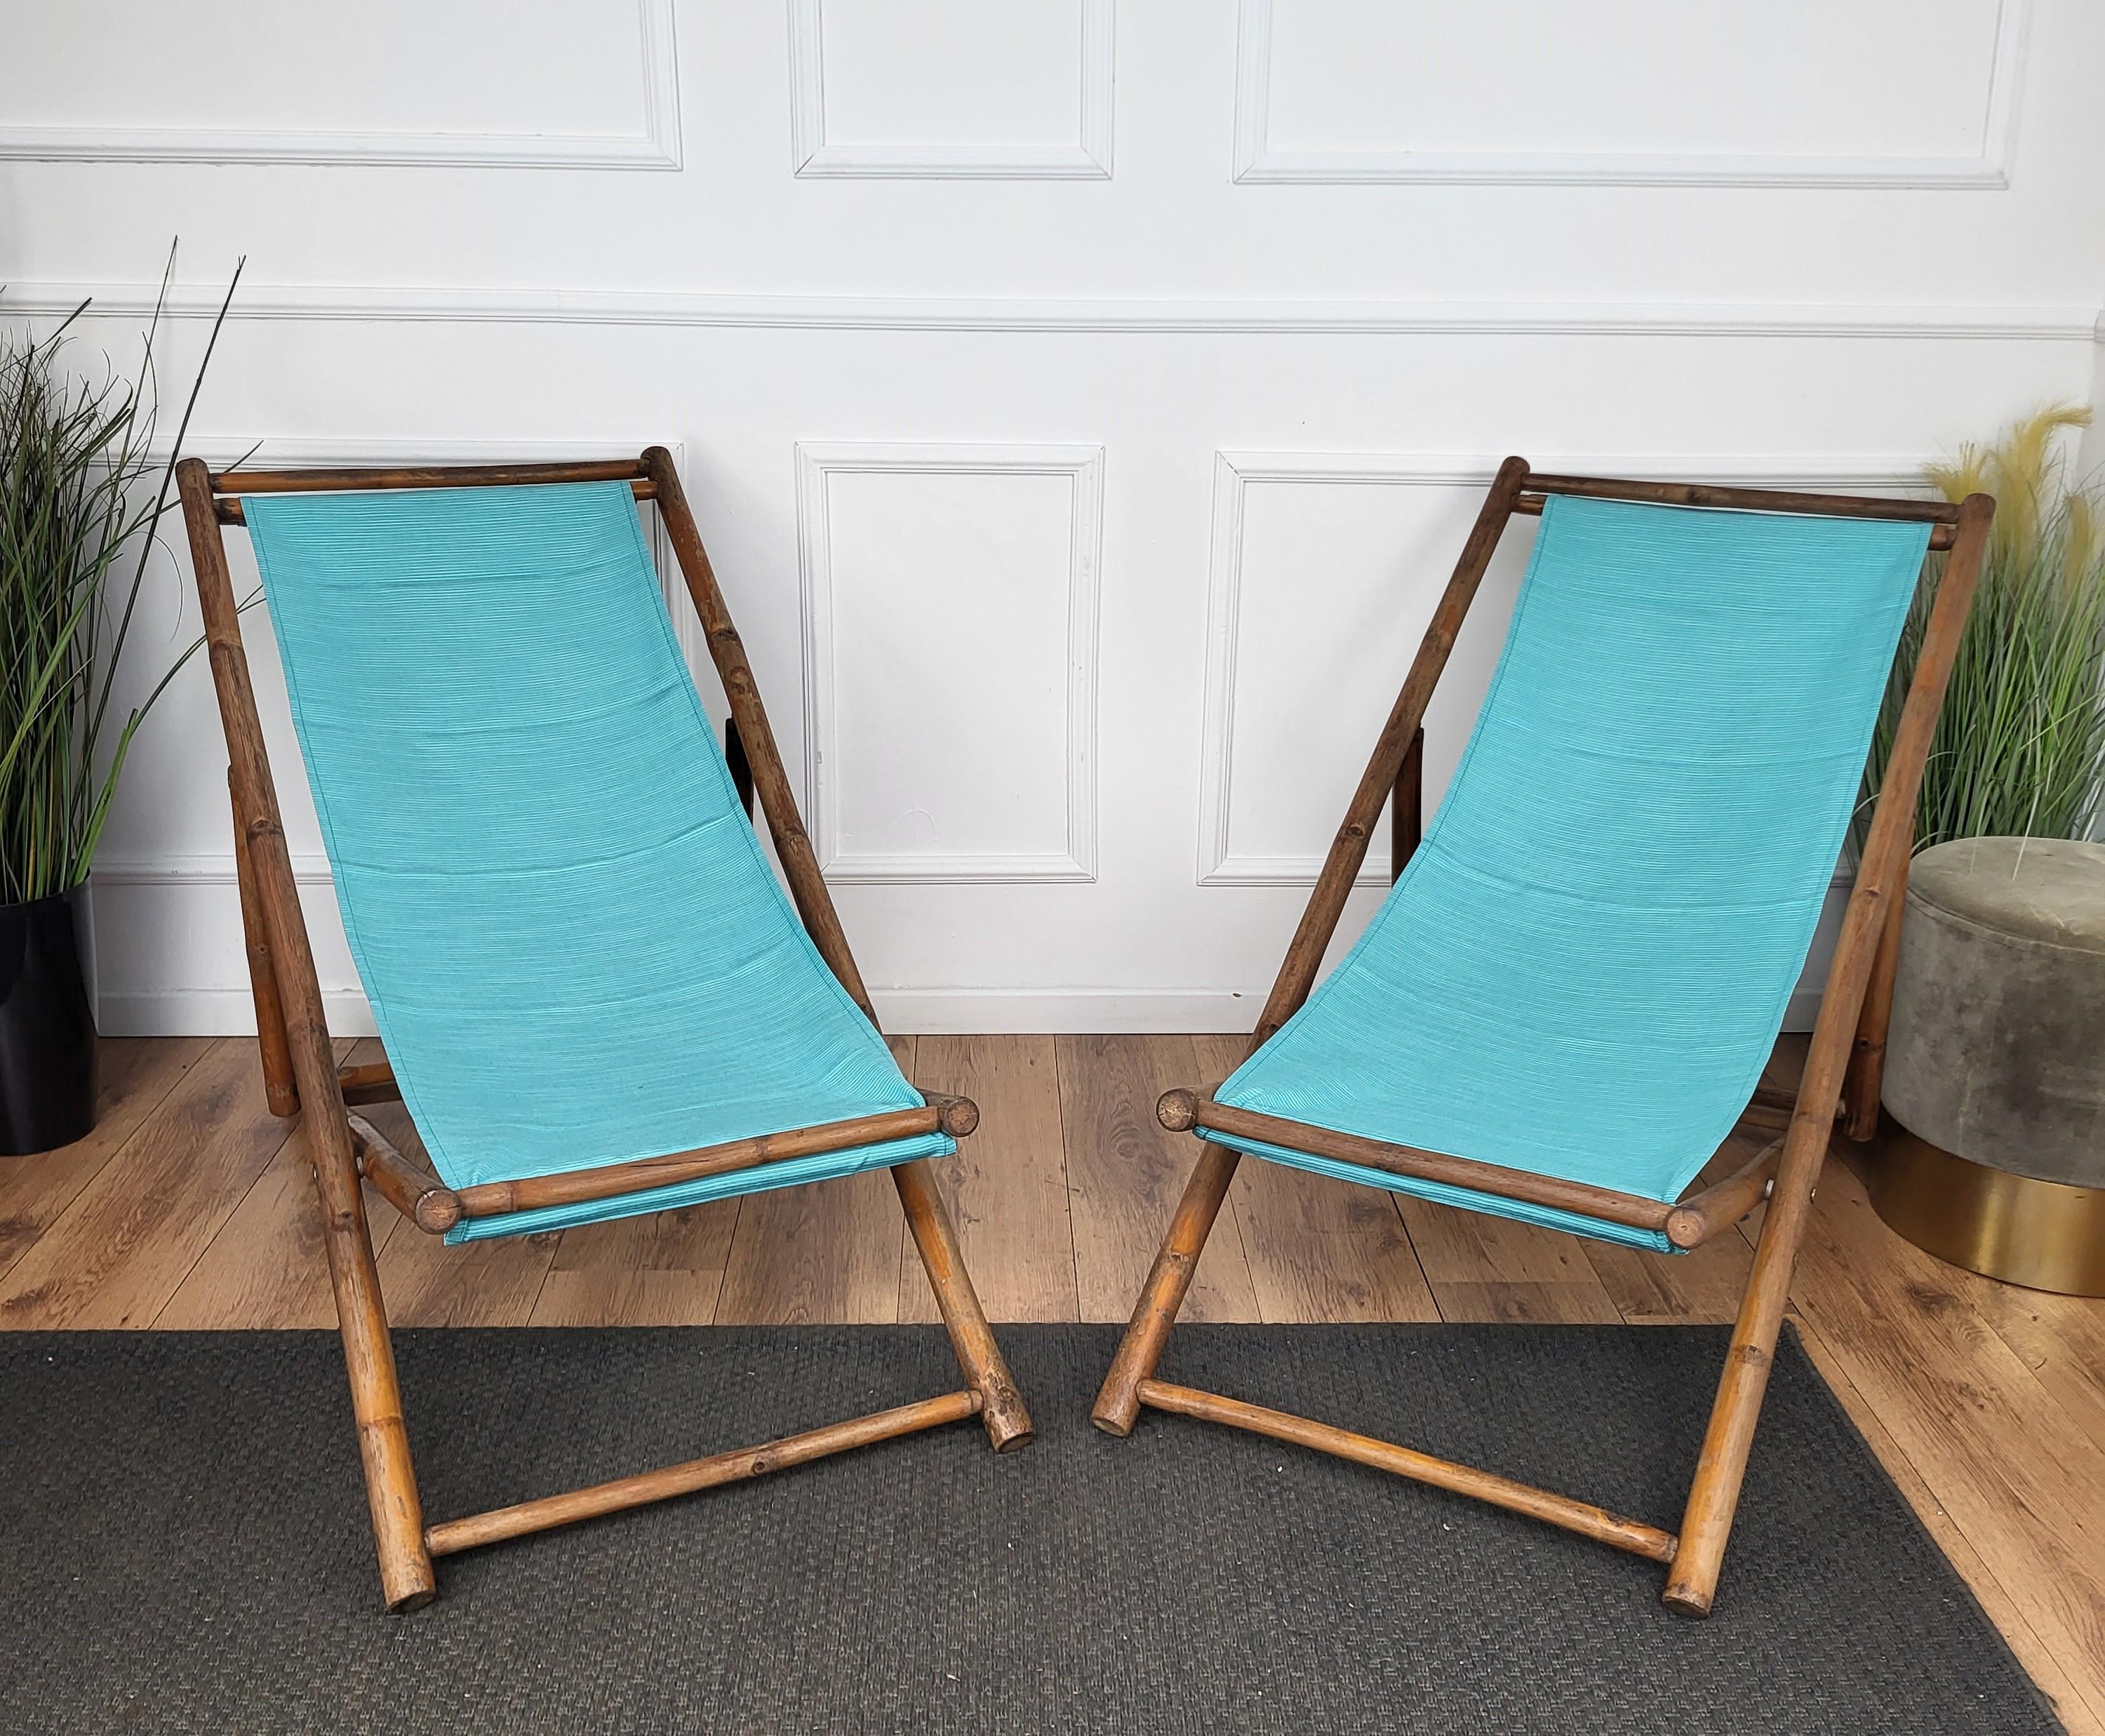 Folding deck chair or lounger chair, with 3 different positions. Very comfortable for patio or garden. The fabric is in good condition but can easily be changed. We have 6 available.